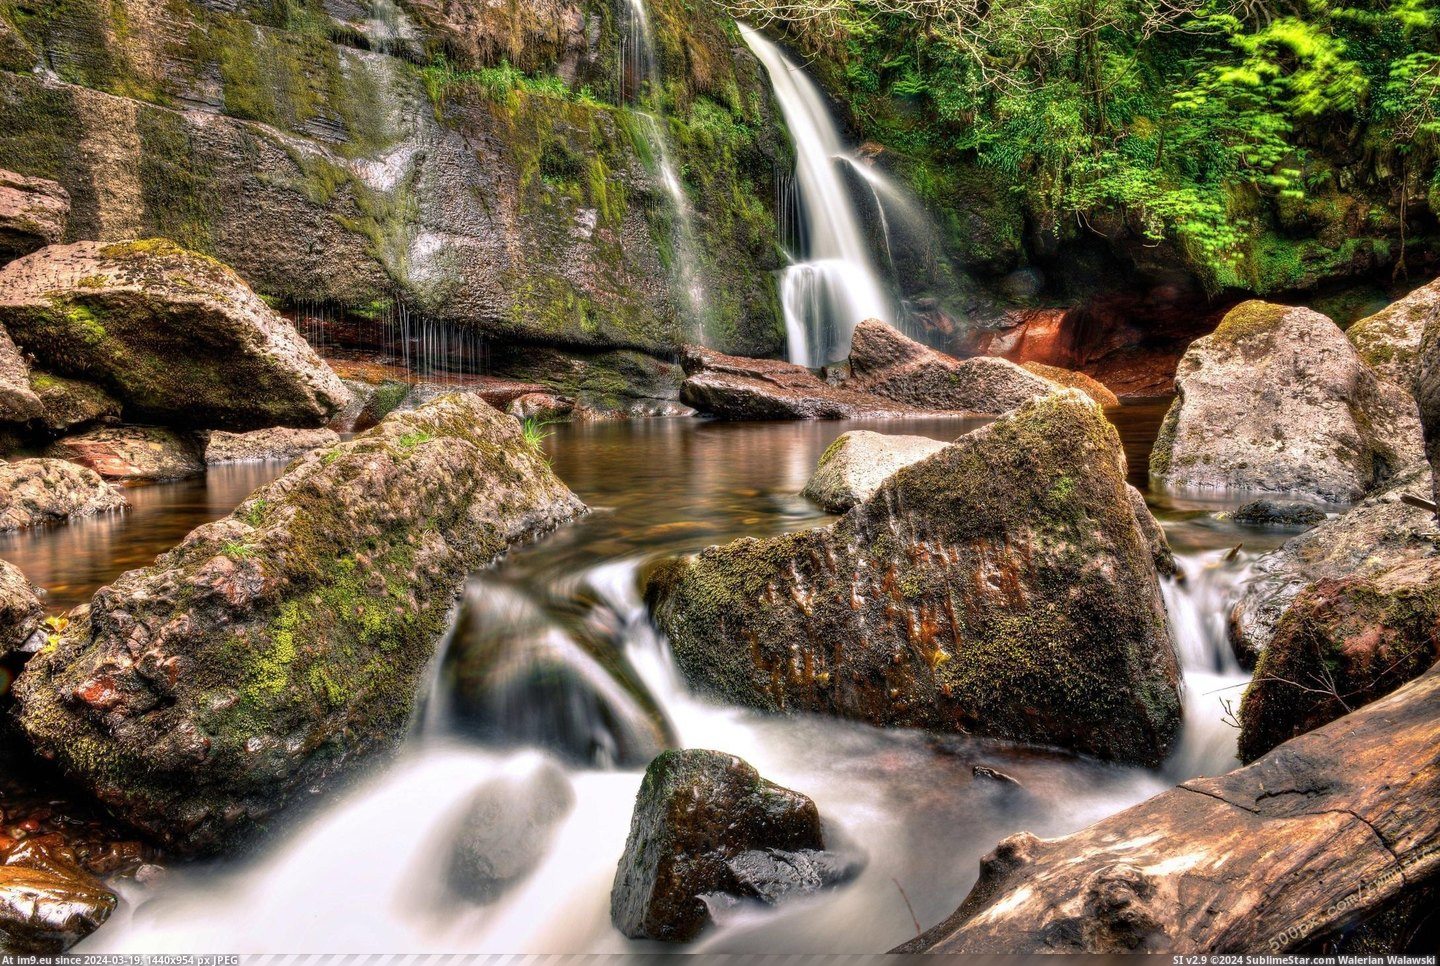 #Find #Waterfall #Secluded #Argyll #Nameless #Scotland #Locals [Earthporn] Only us locals will be able to tell you how to find this secluded, nameless waterfall in Argyll, Scotland. [2180x145 Pic. (Изображение из альбом My r/EARTHPORN favs))